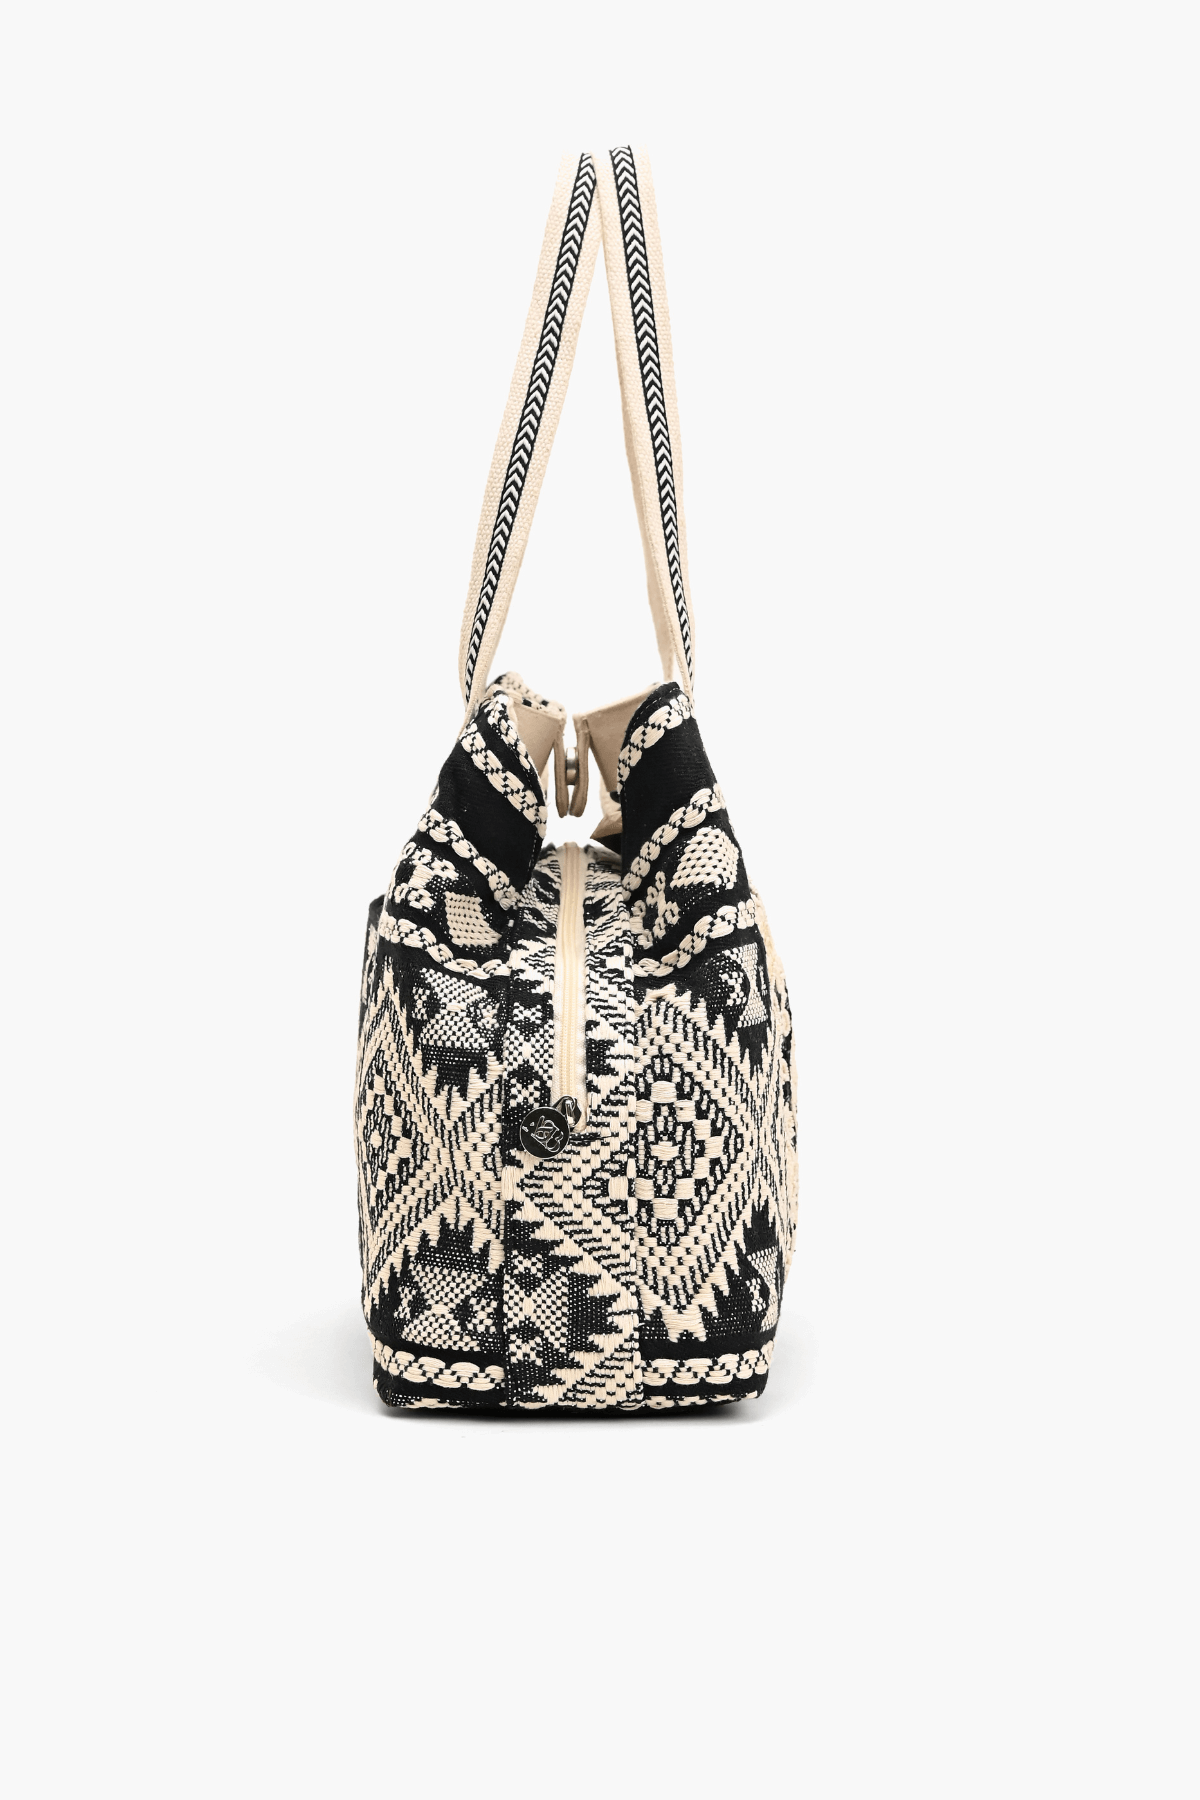 America and Beyond Embroidered Beach Tote